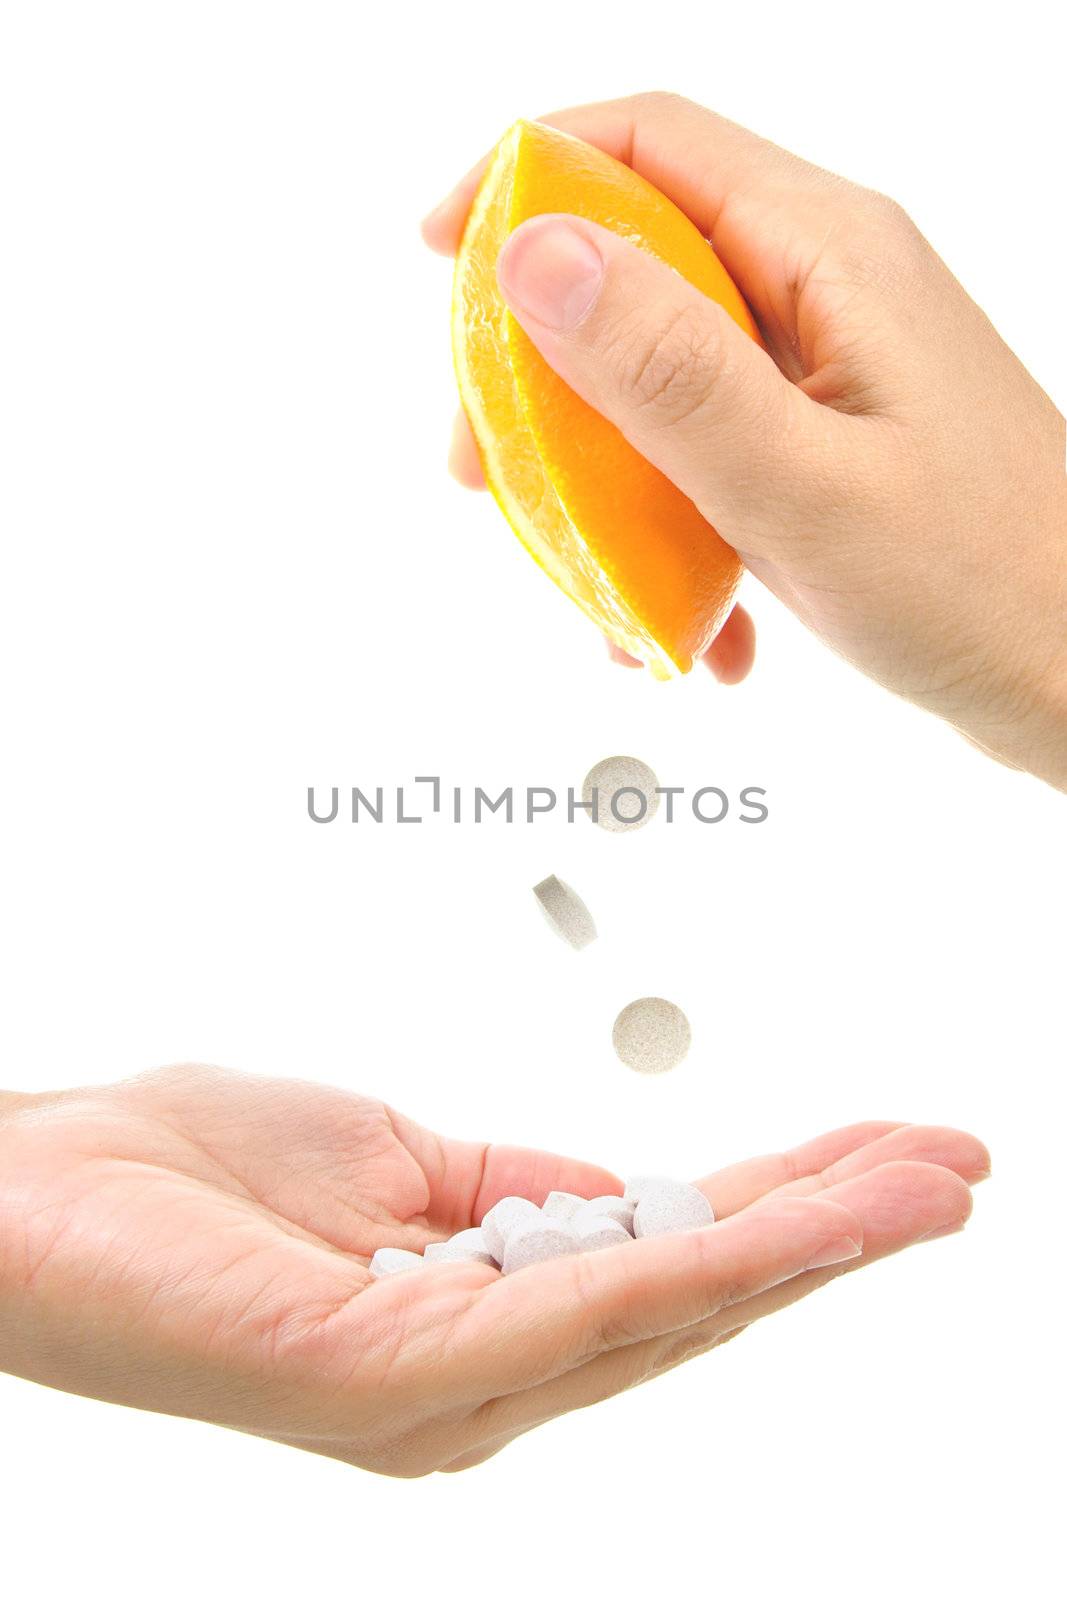 Conceptual image of vitamin C tablets being squeezed out of an orange